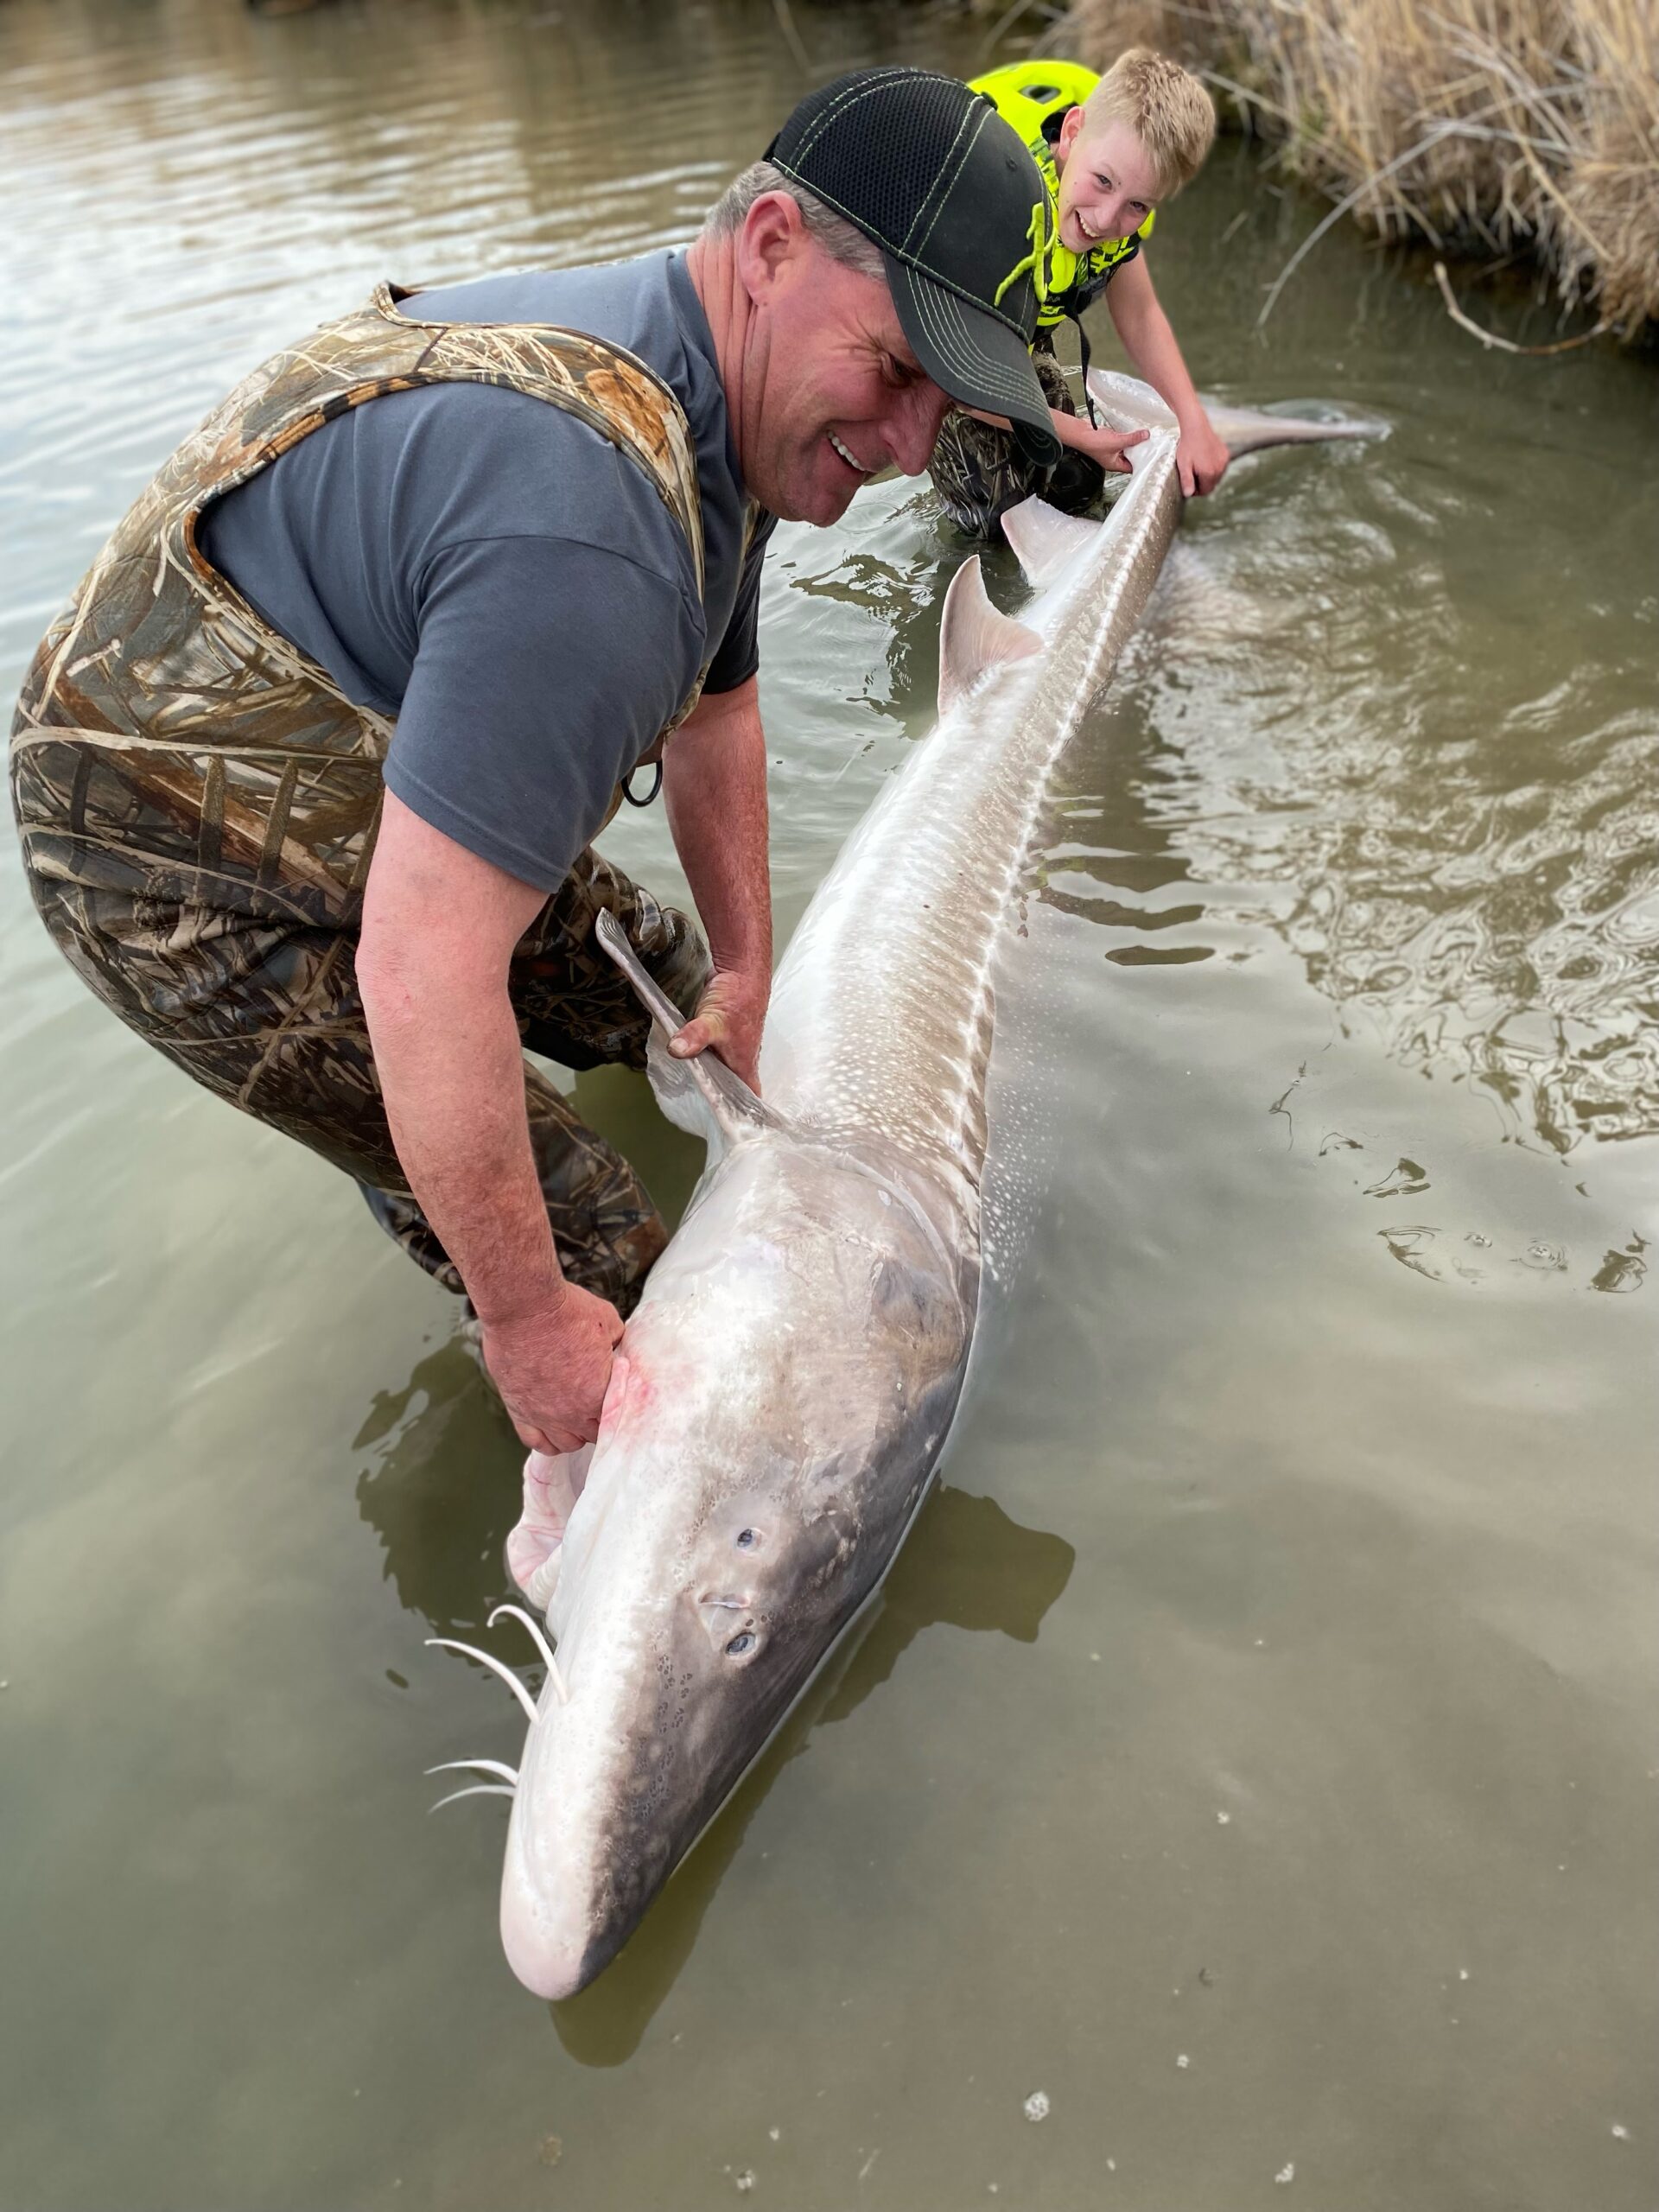 12-year-old catches nearly 10-foot sturgeon